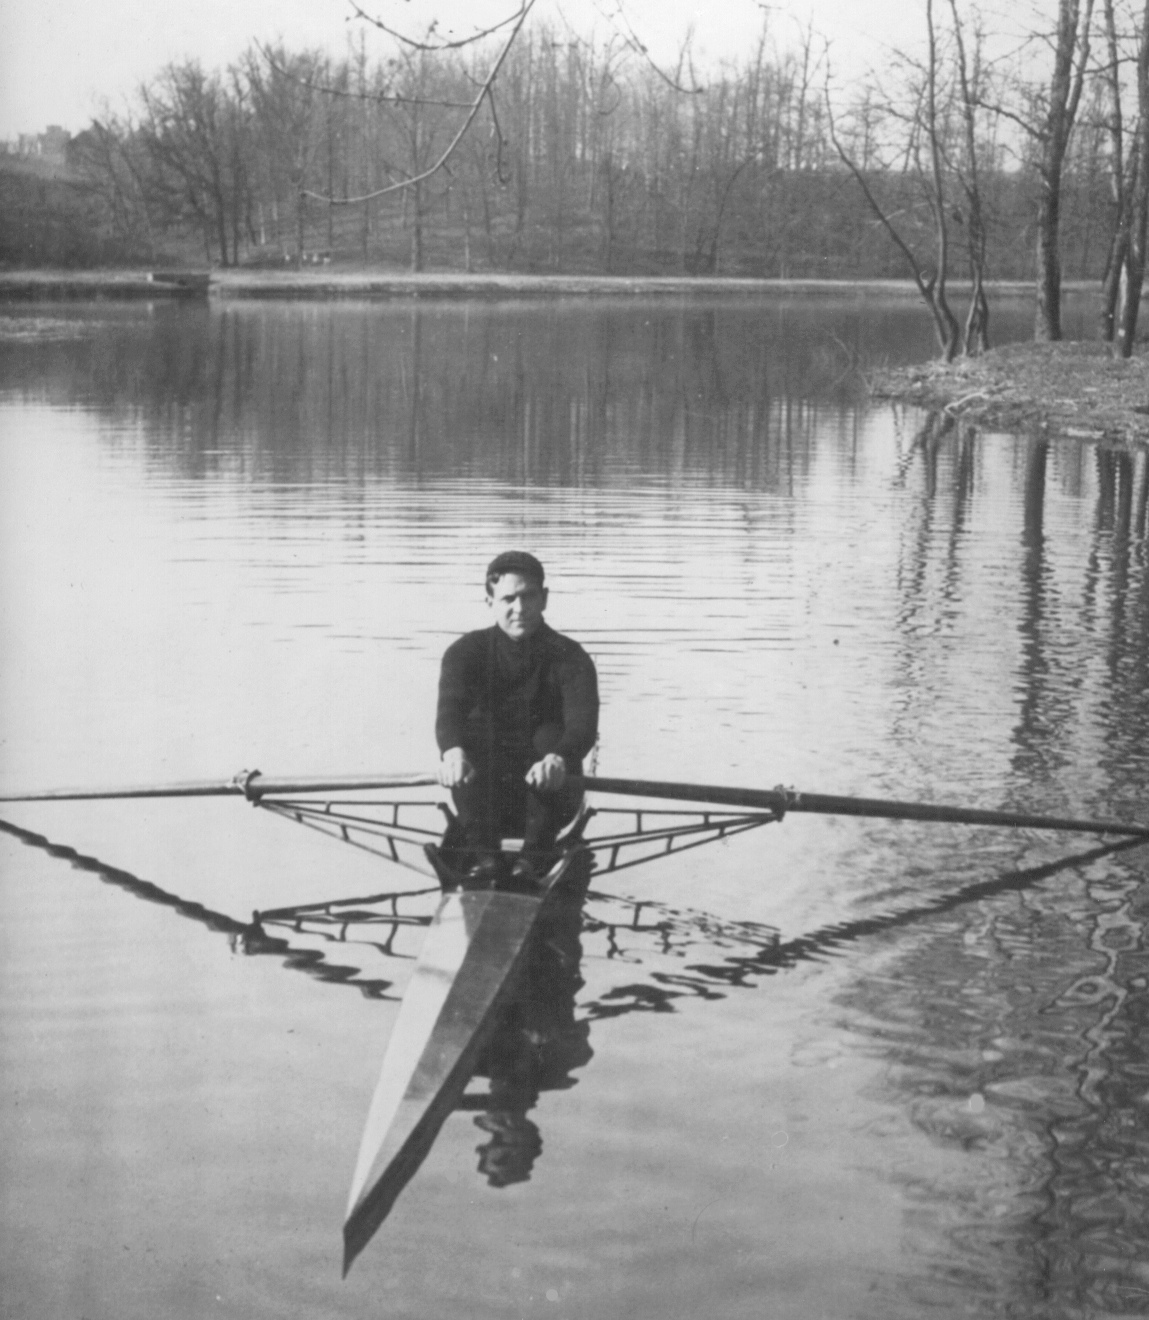 A man standing next to a body of water